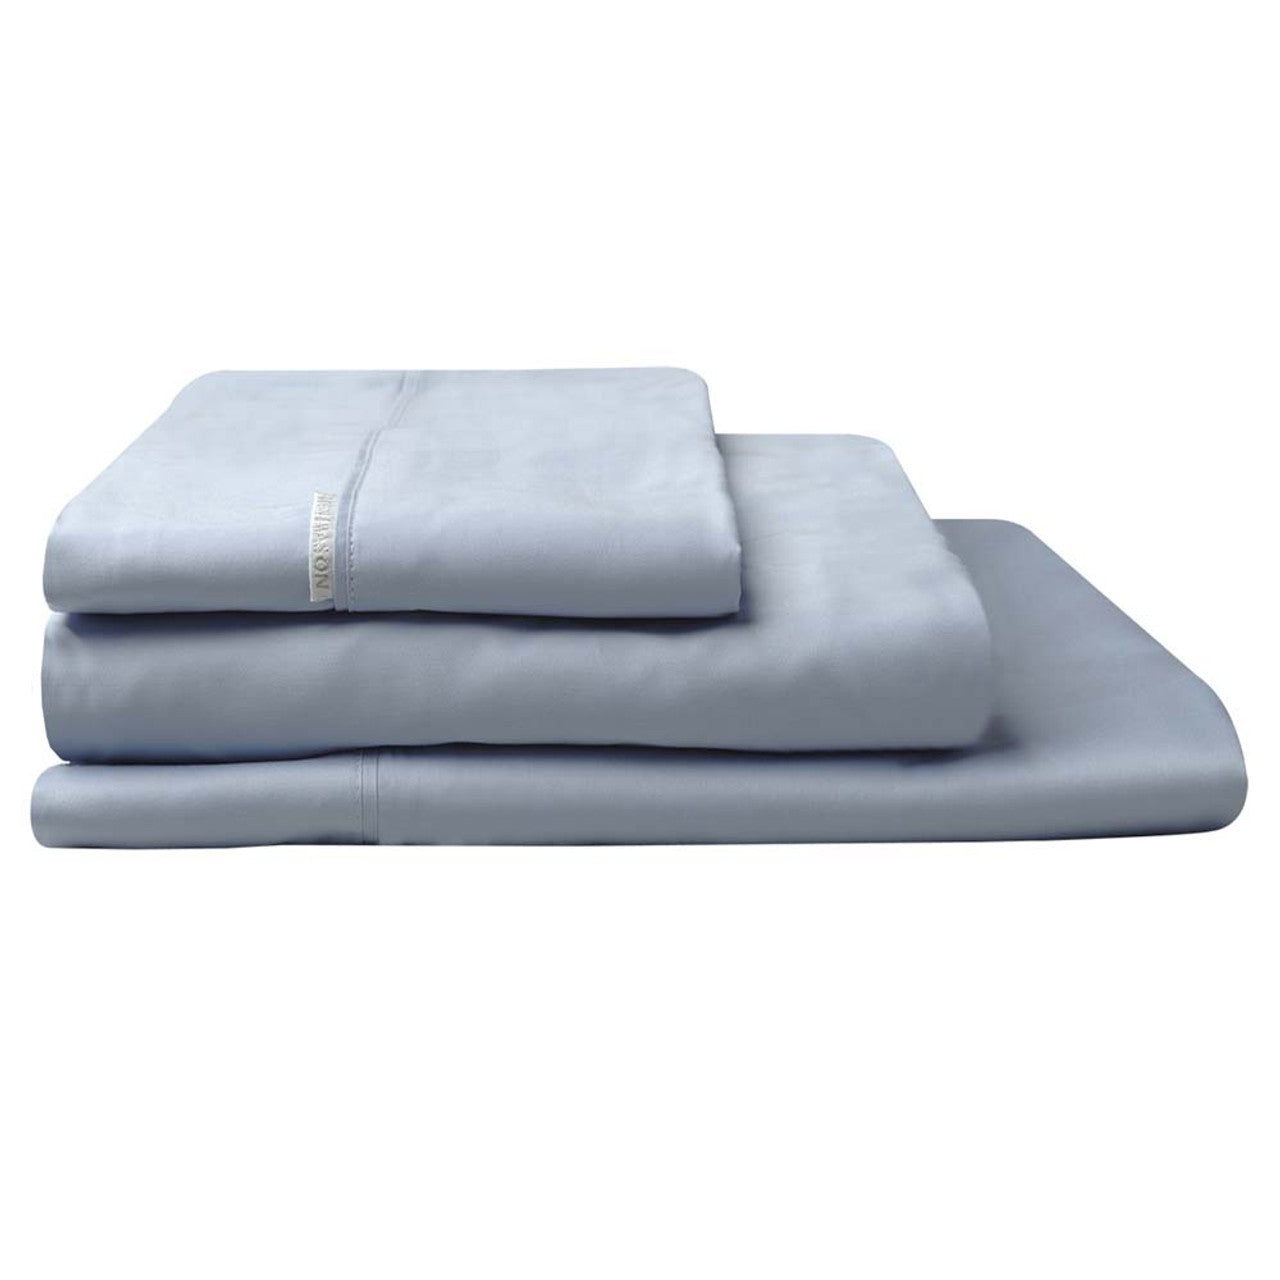 The Logan and Mason 300TC Cotton Percale Denim Bed Sheet Set is made from cotton, known for its natural breathability. 